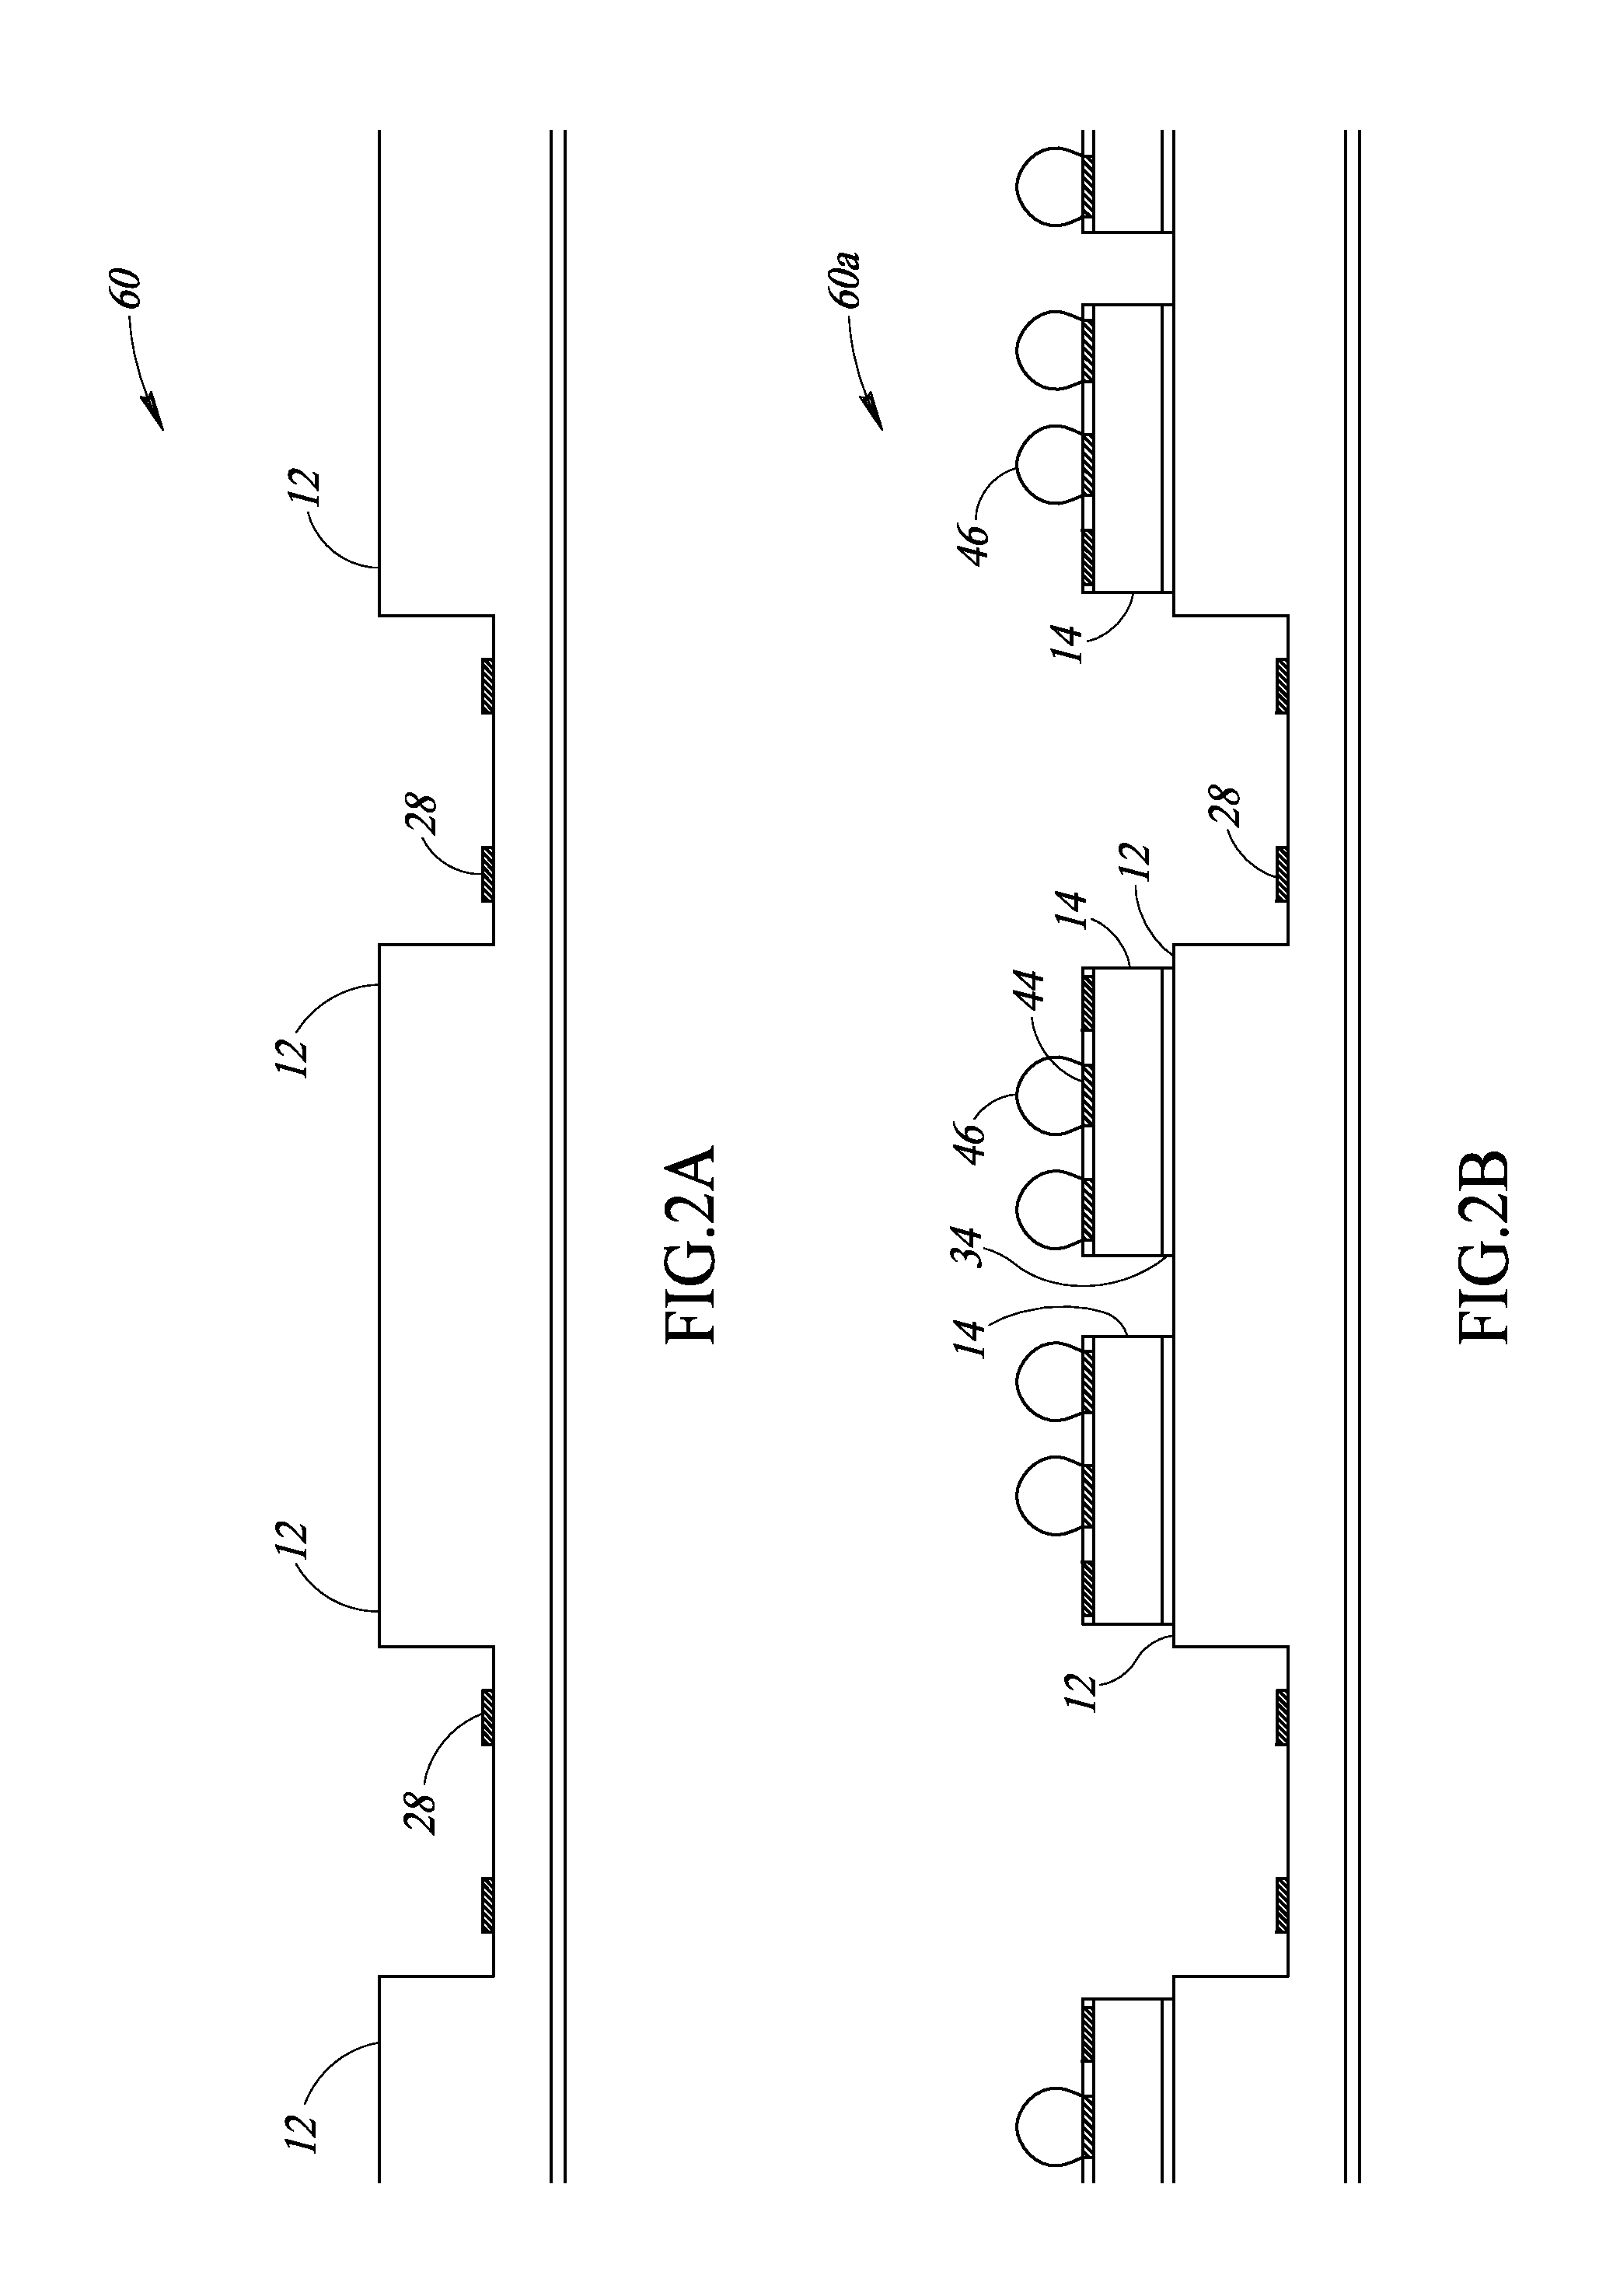 Packages for semiconductor devices and methods for assembling same